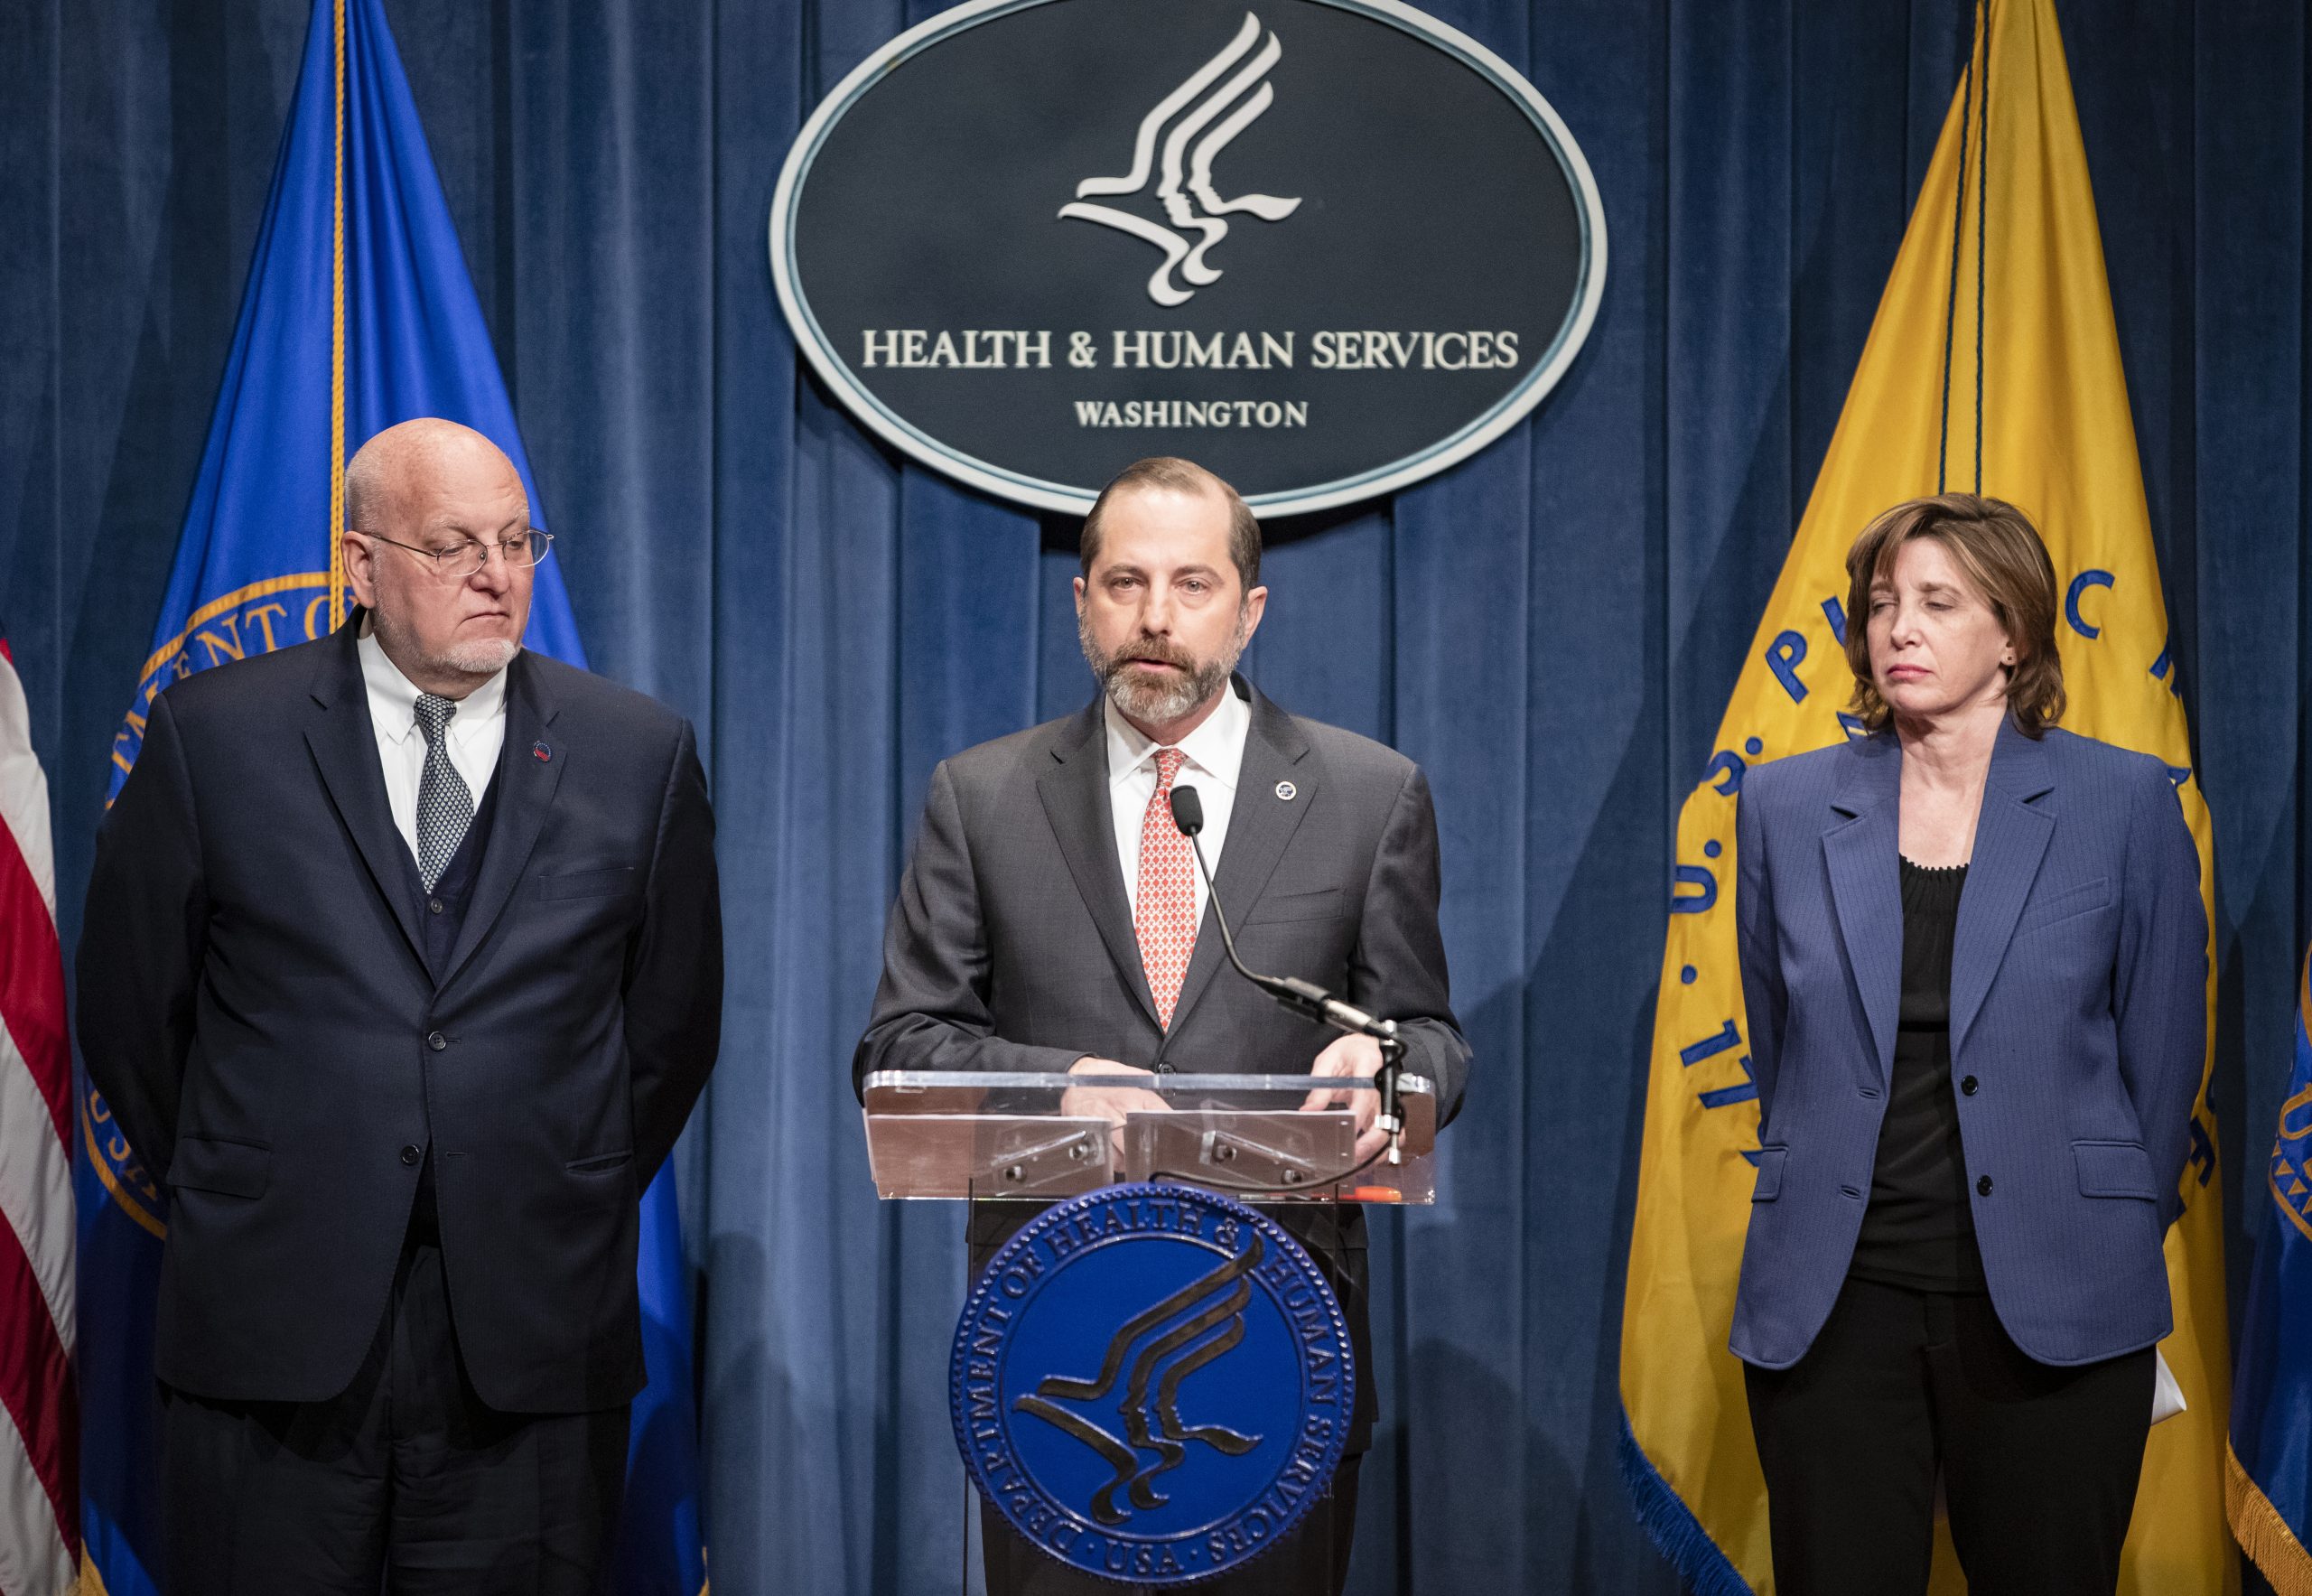 Health And Human Services Briefs The Media On The Department's Response To The Coronavirus